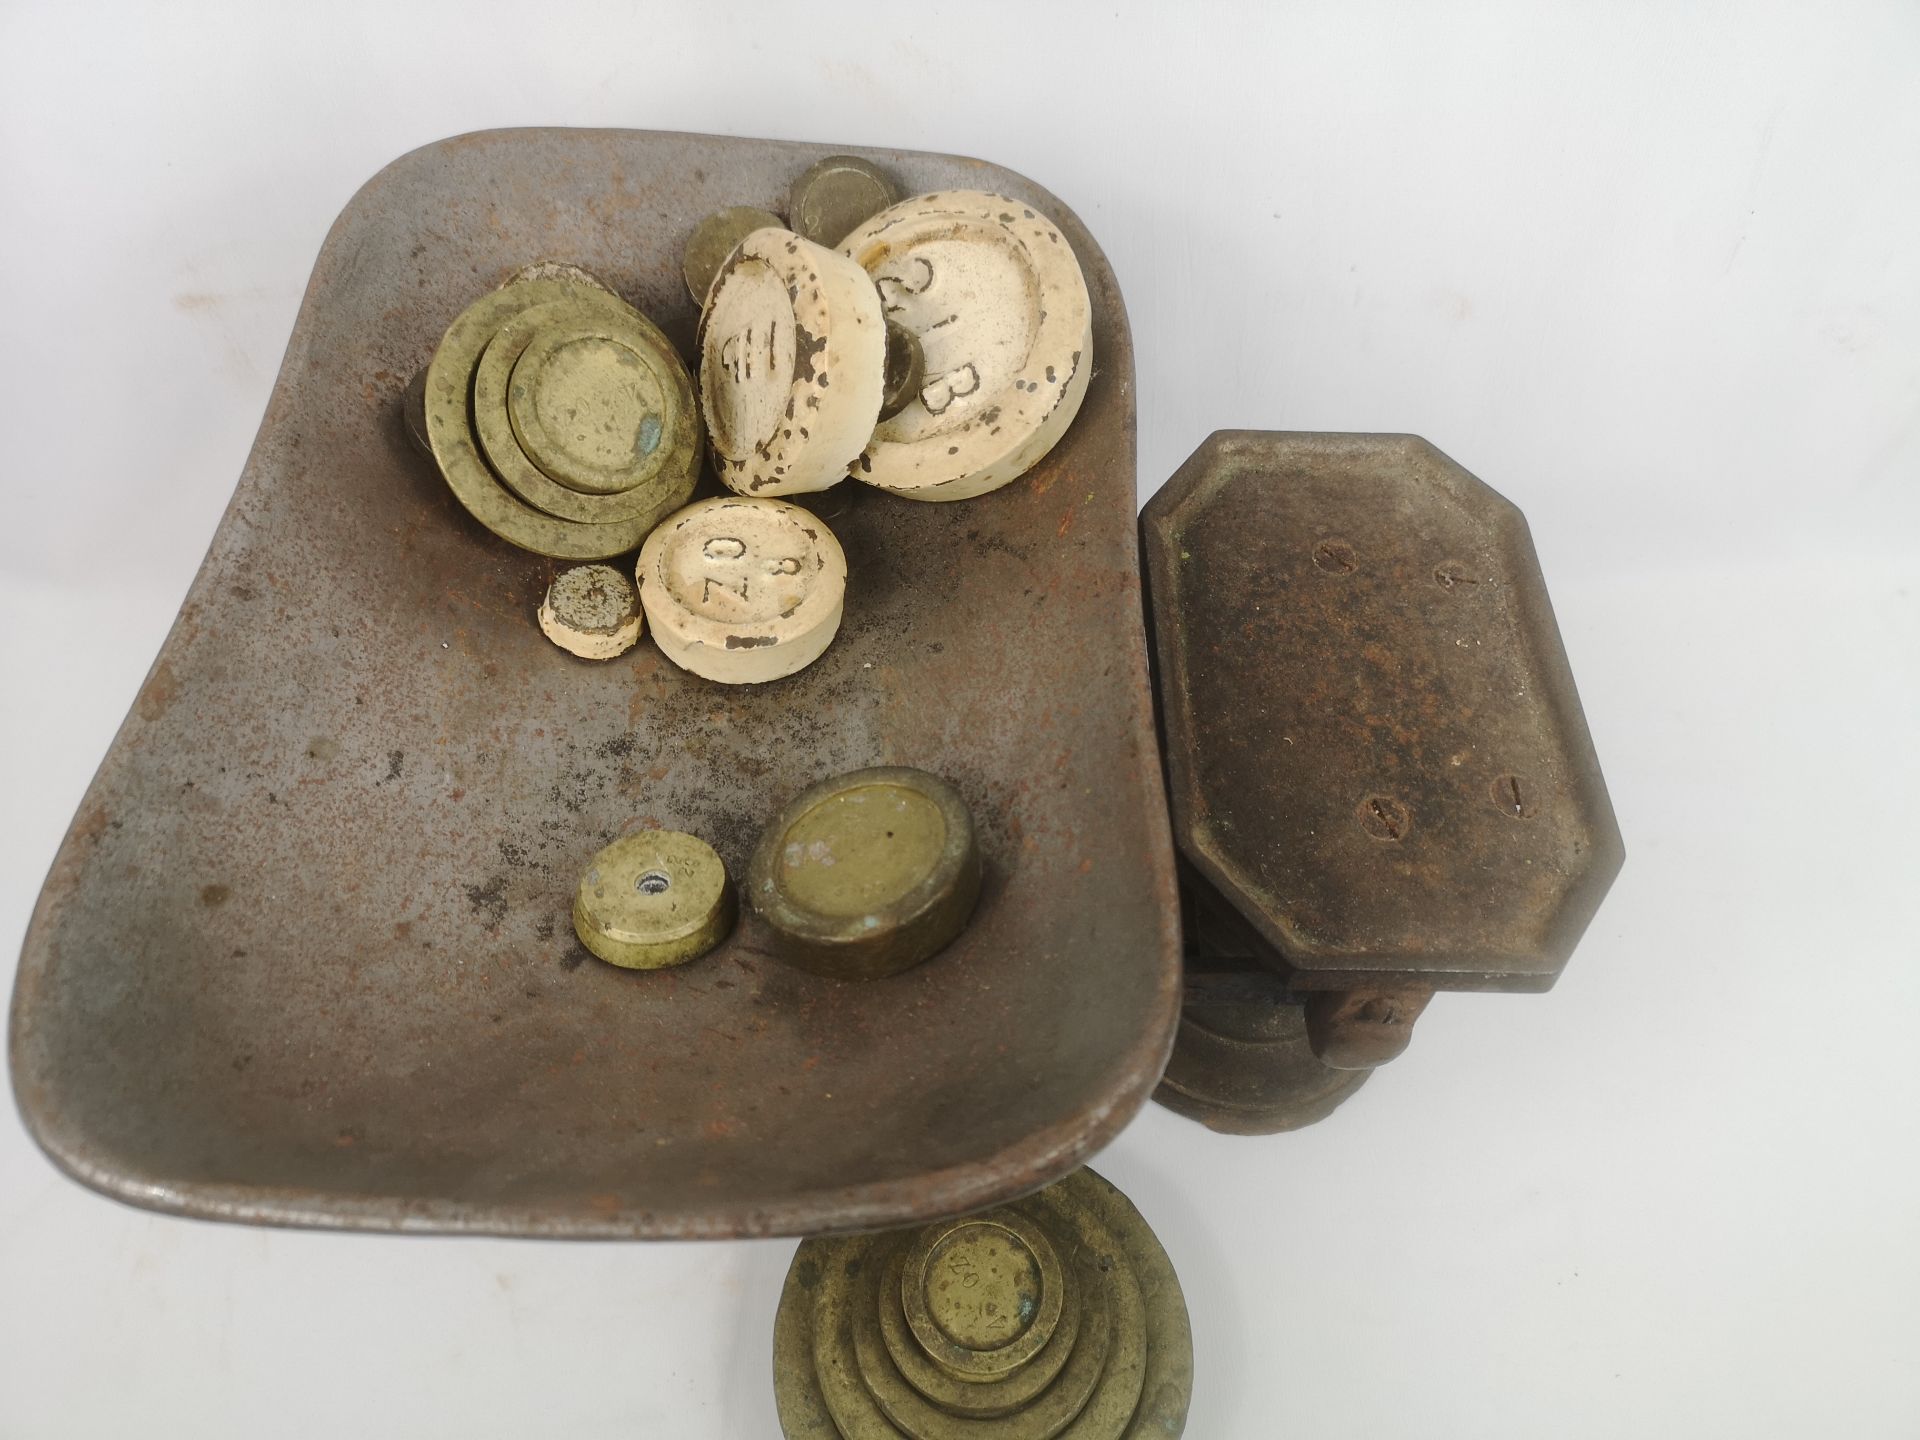 Cast iron weighing scales - Image 3 of 4